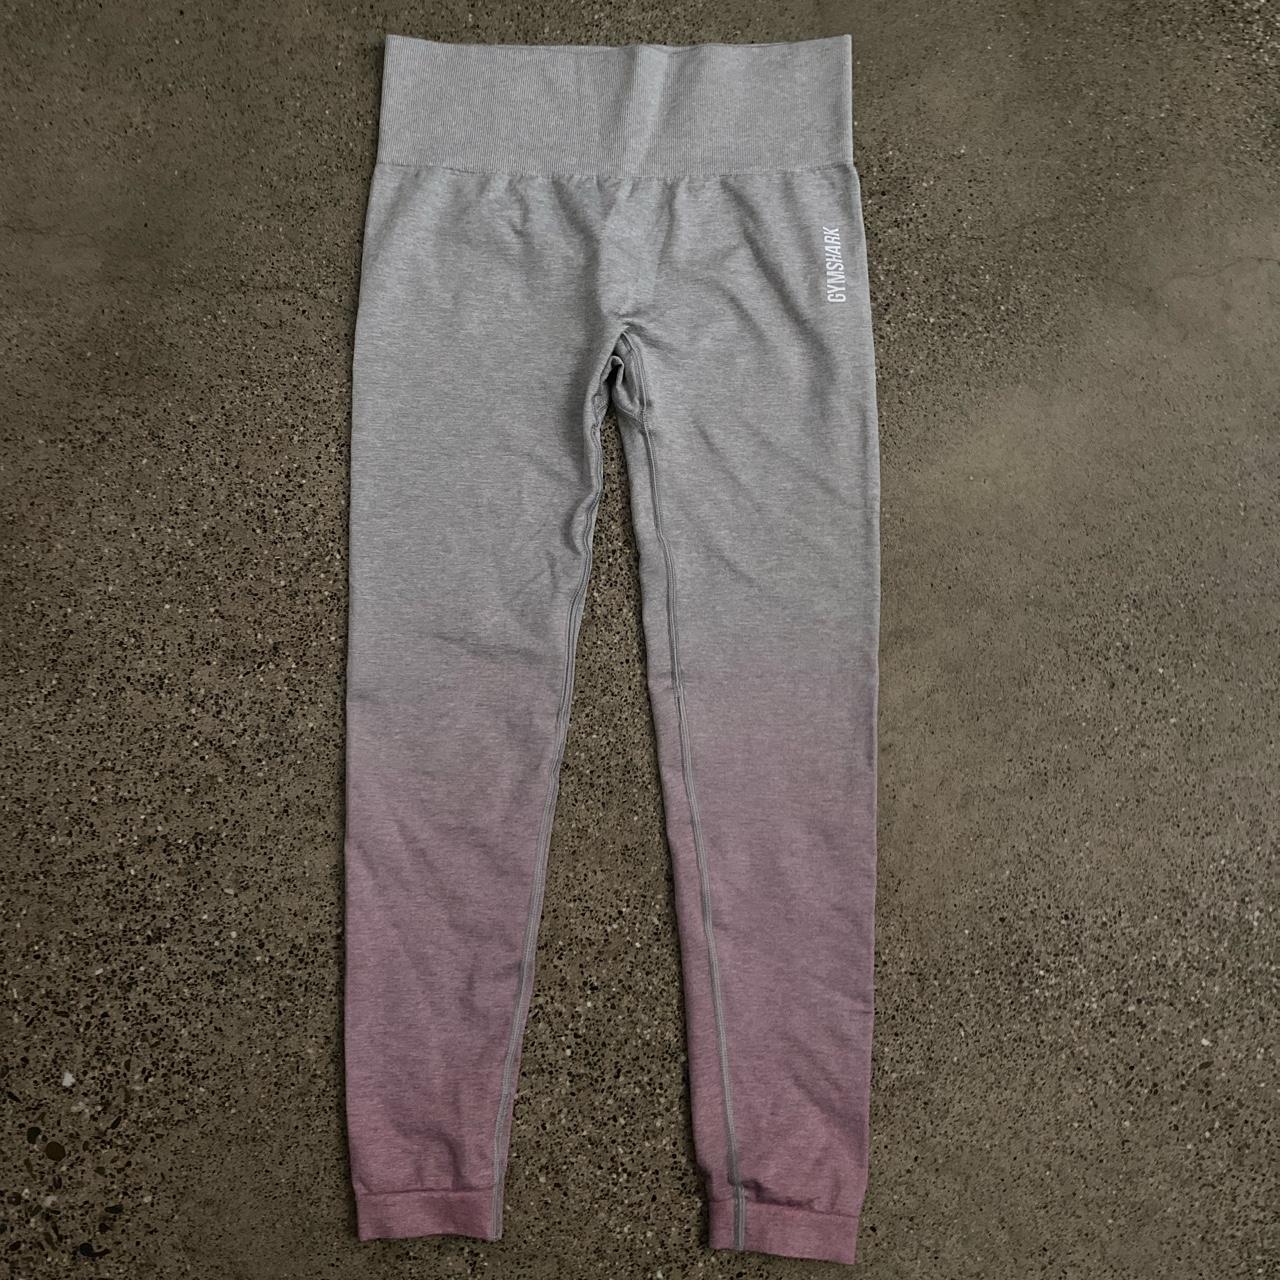 Free shipping! Gymshark pink and grey ombré